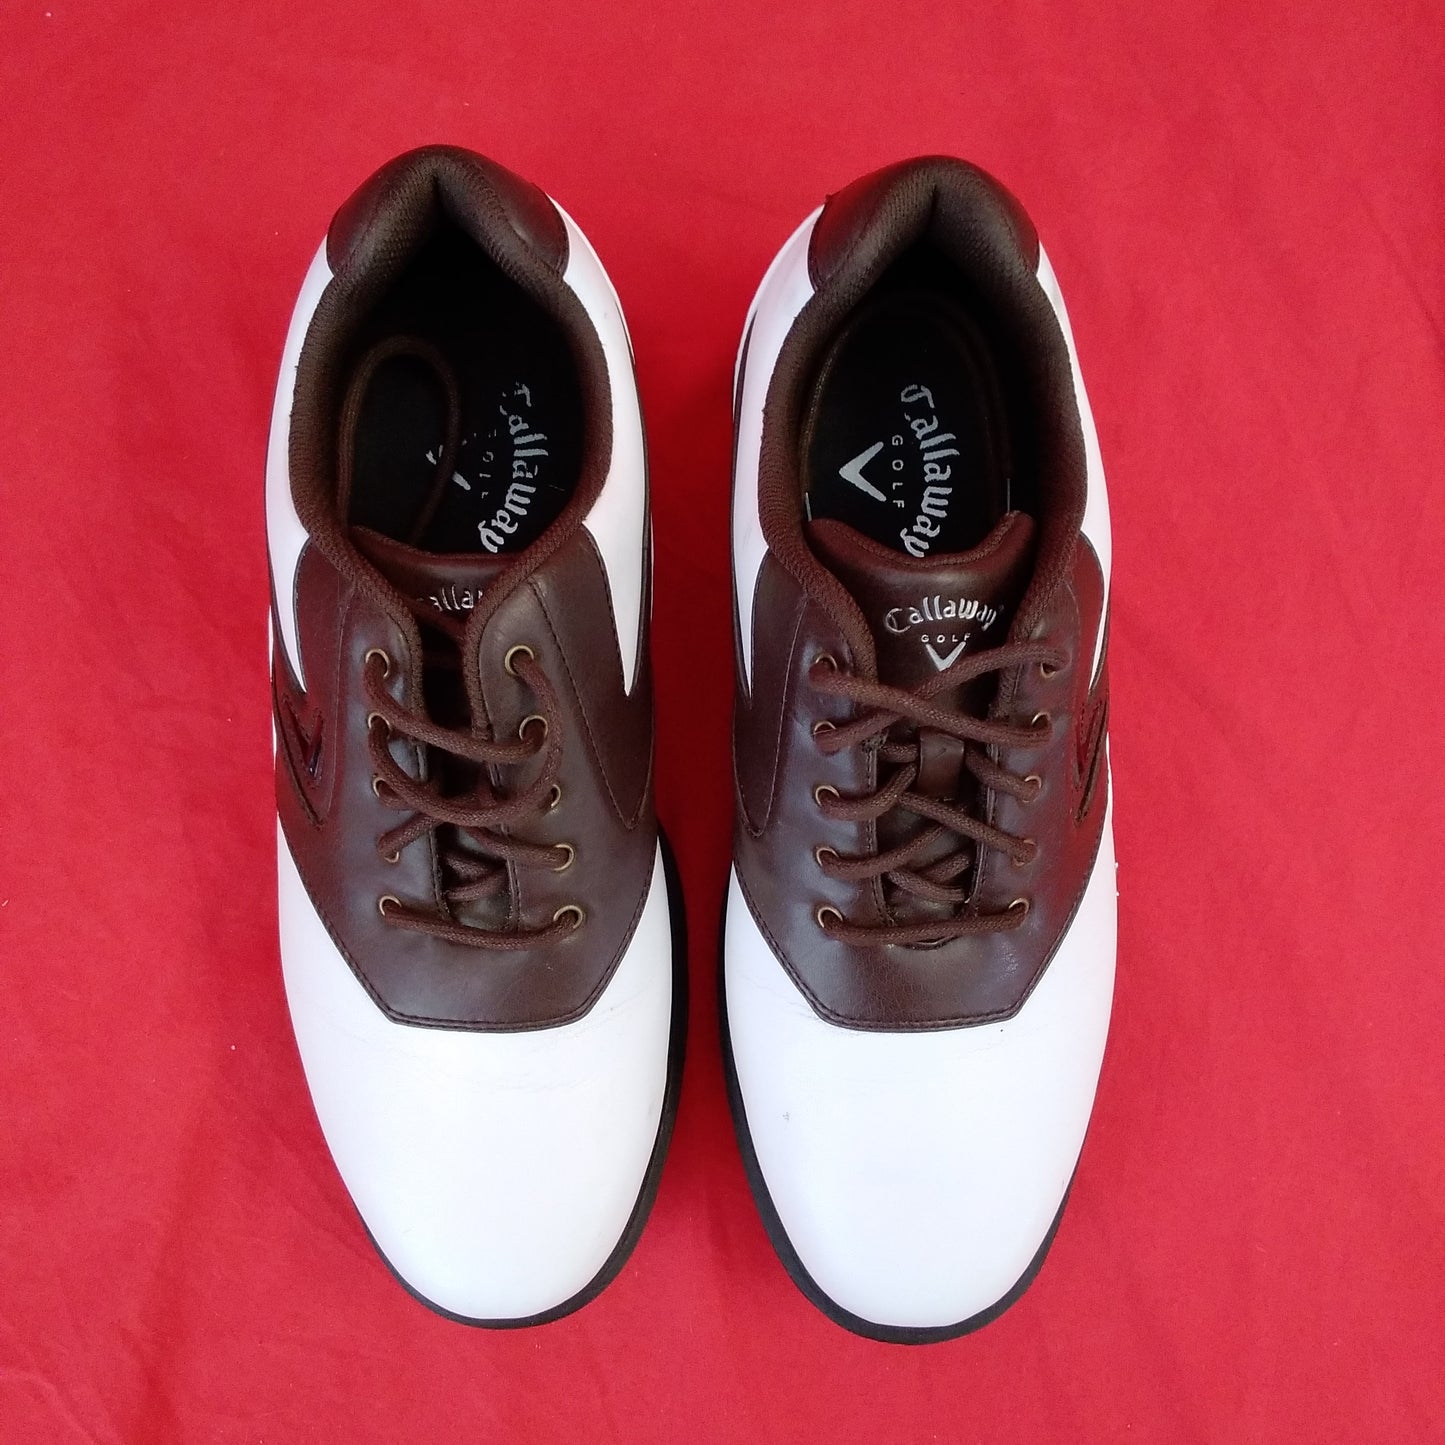 Men's Callaway White and Brown Leather Golf Shoes - Size: 8